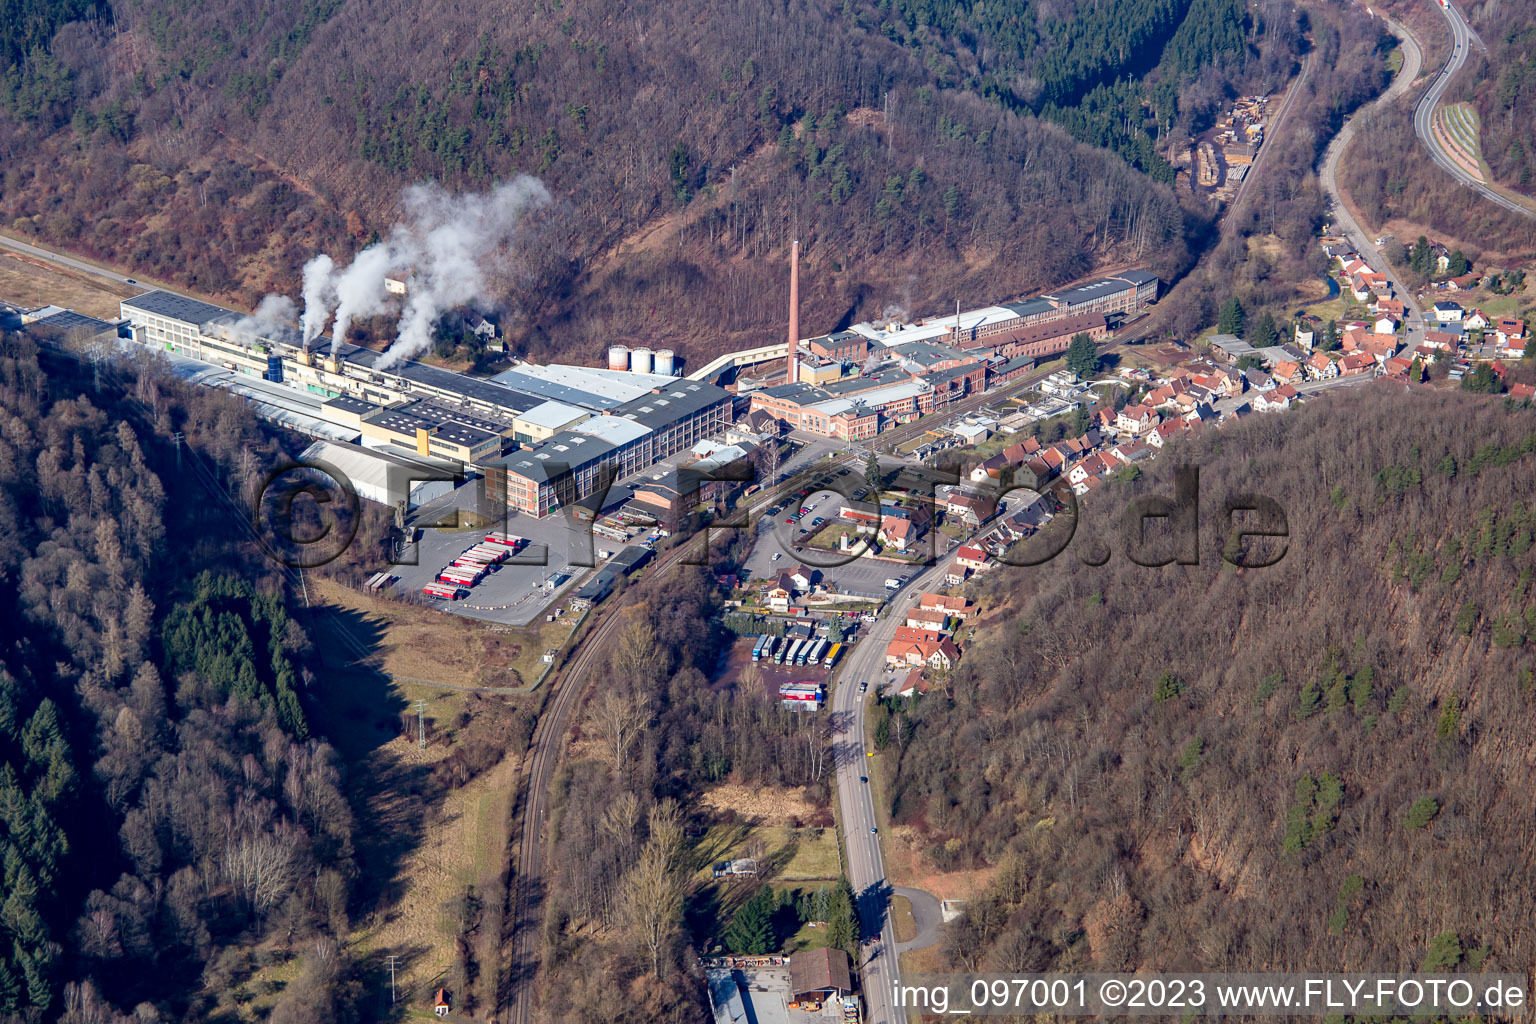 Building and production halls on the premises of Kartonfabrik Buchmann GmbH in the district Sarnstall in Annweiler am Trifels in the state Rhineland-Palatinate, Germany